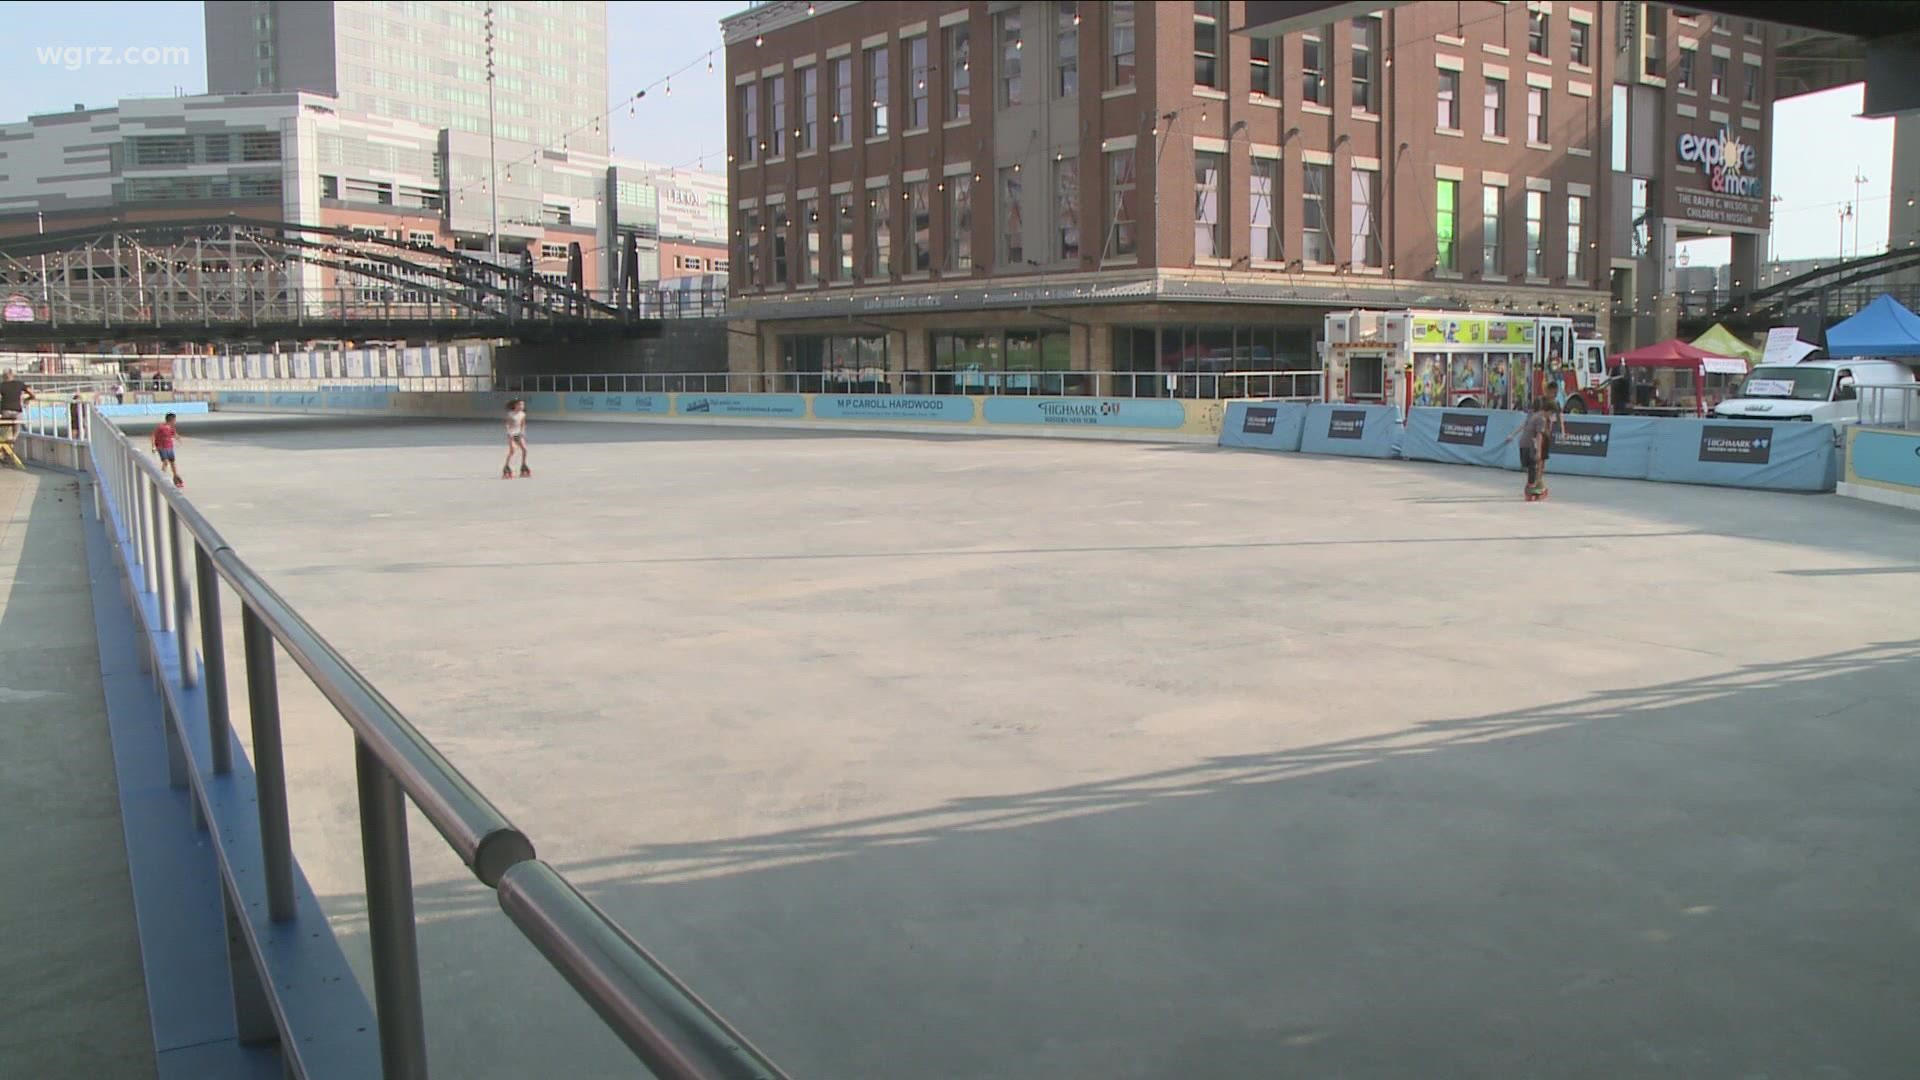 Last weekend for roller rink festivities at Canalside